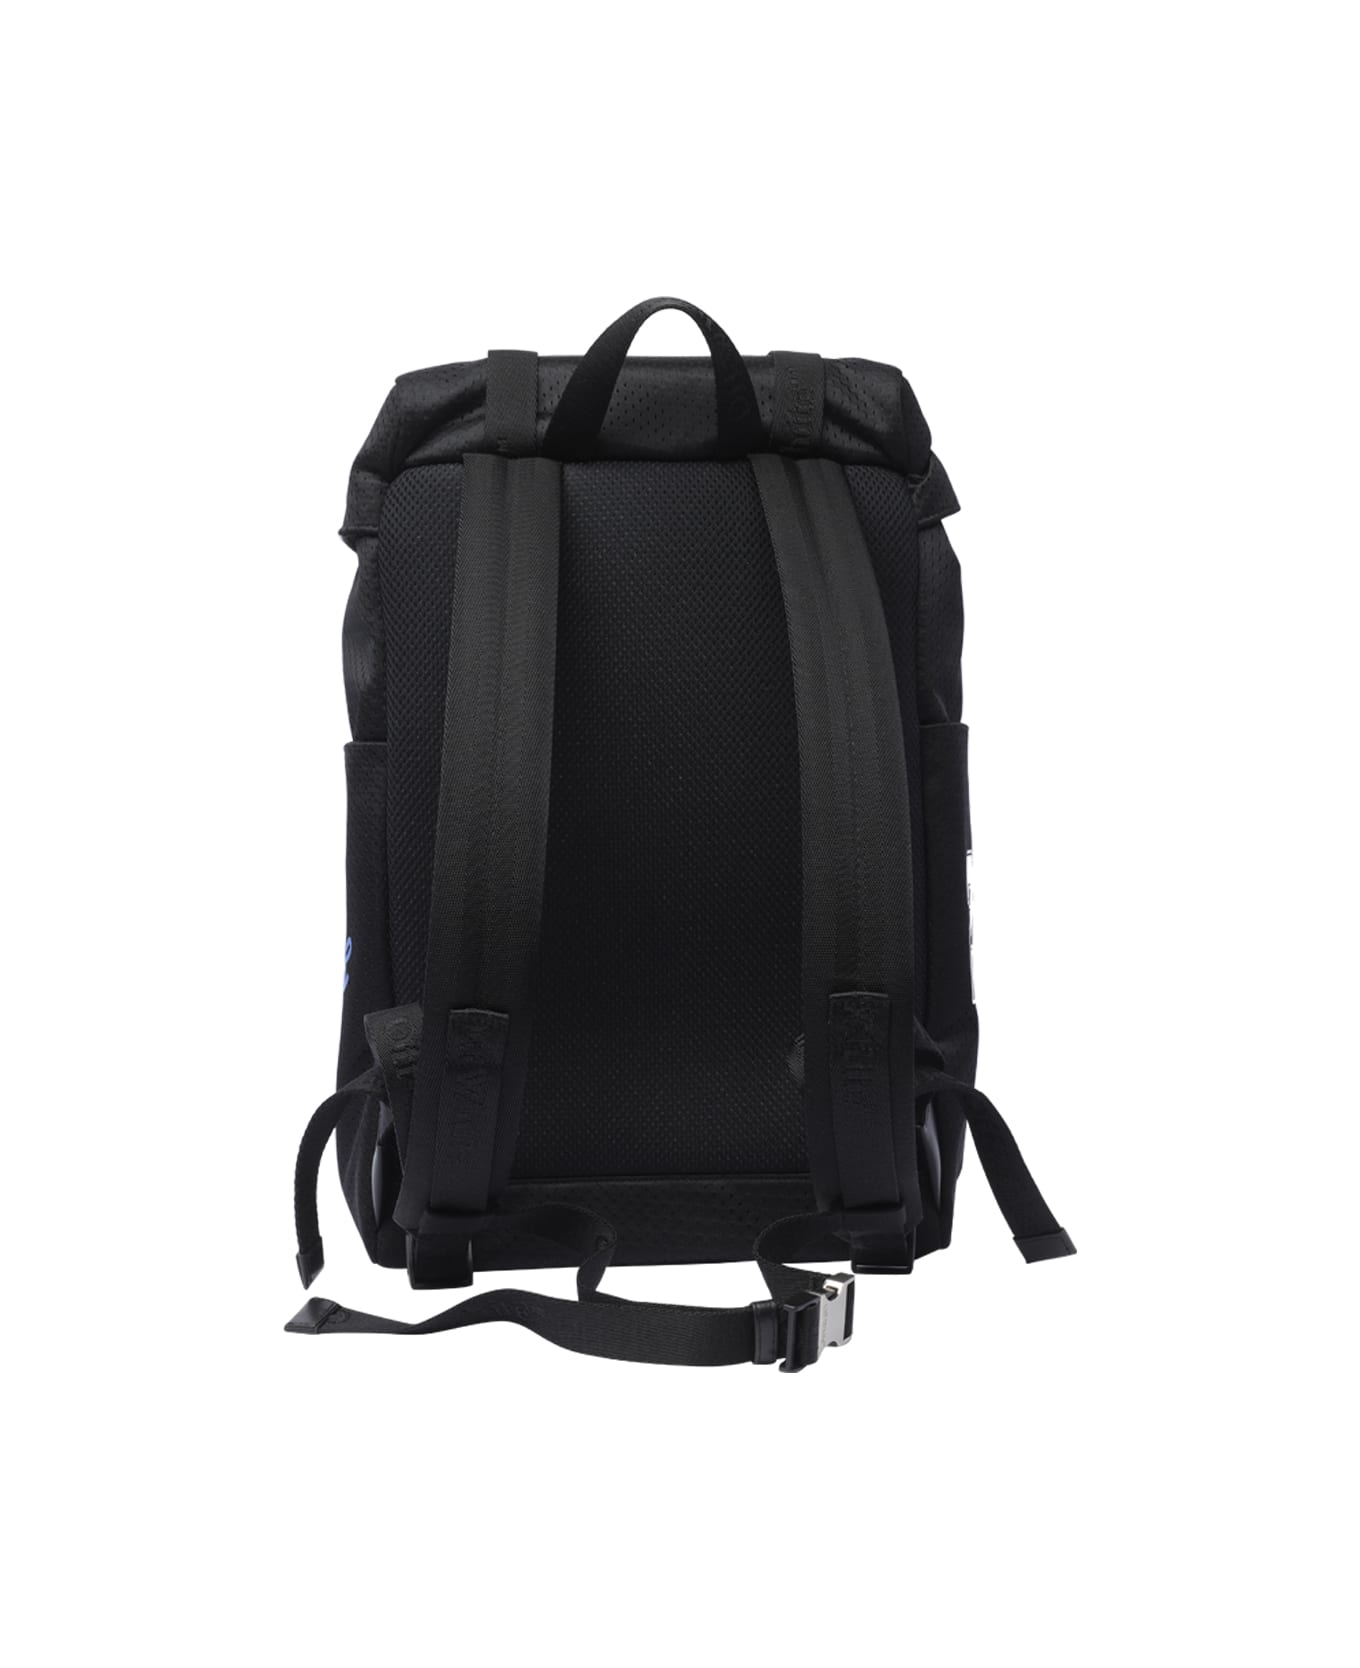 Off-White Outdoor Backpack - Black/white